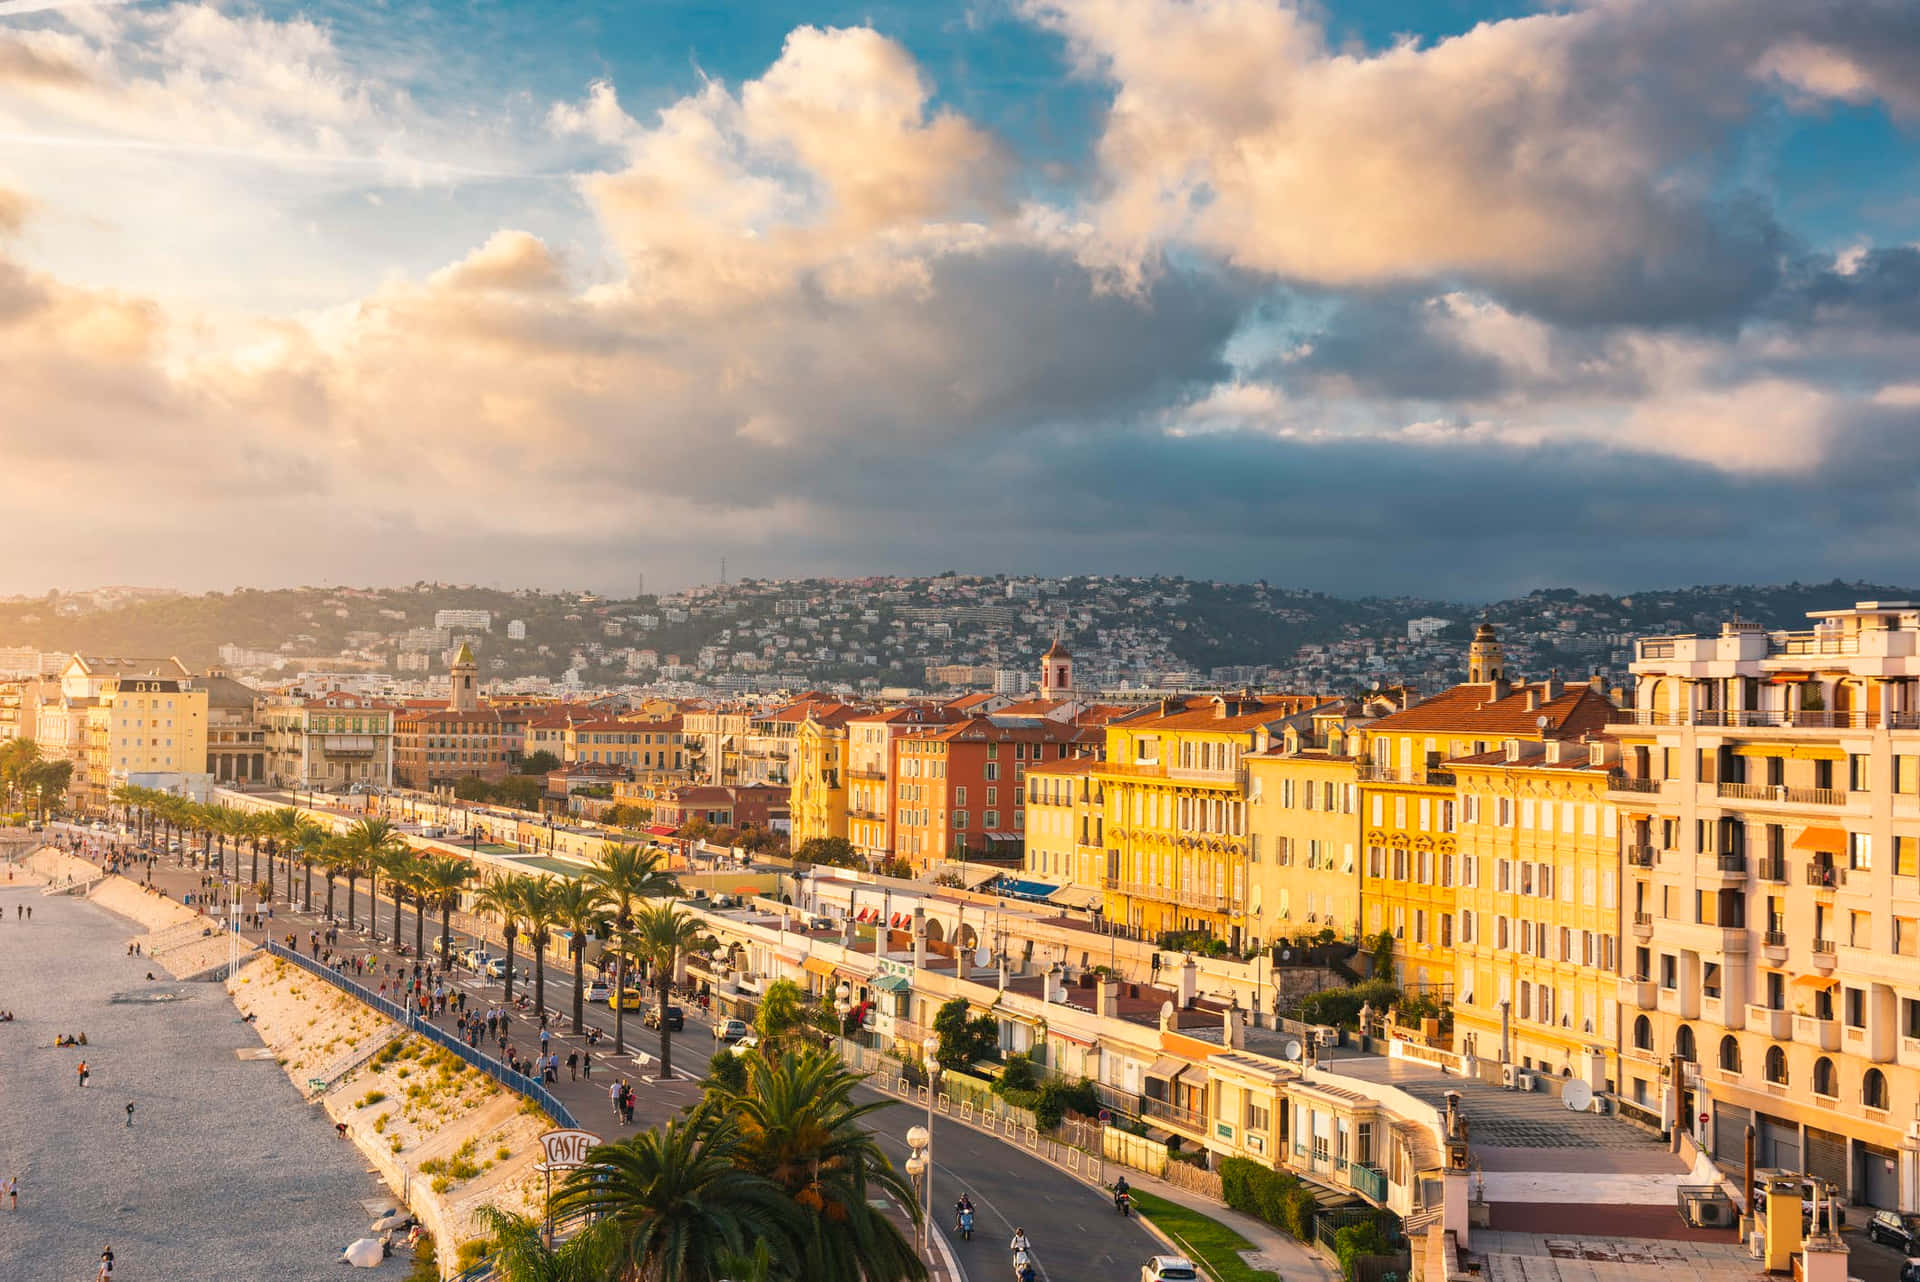 Nice, France - Aerial View Of The City At Sunset